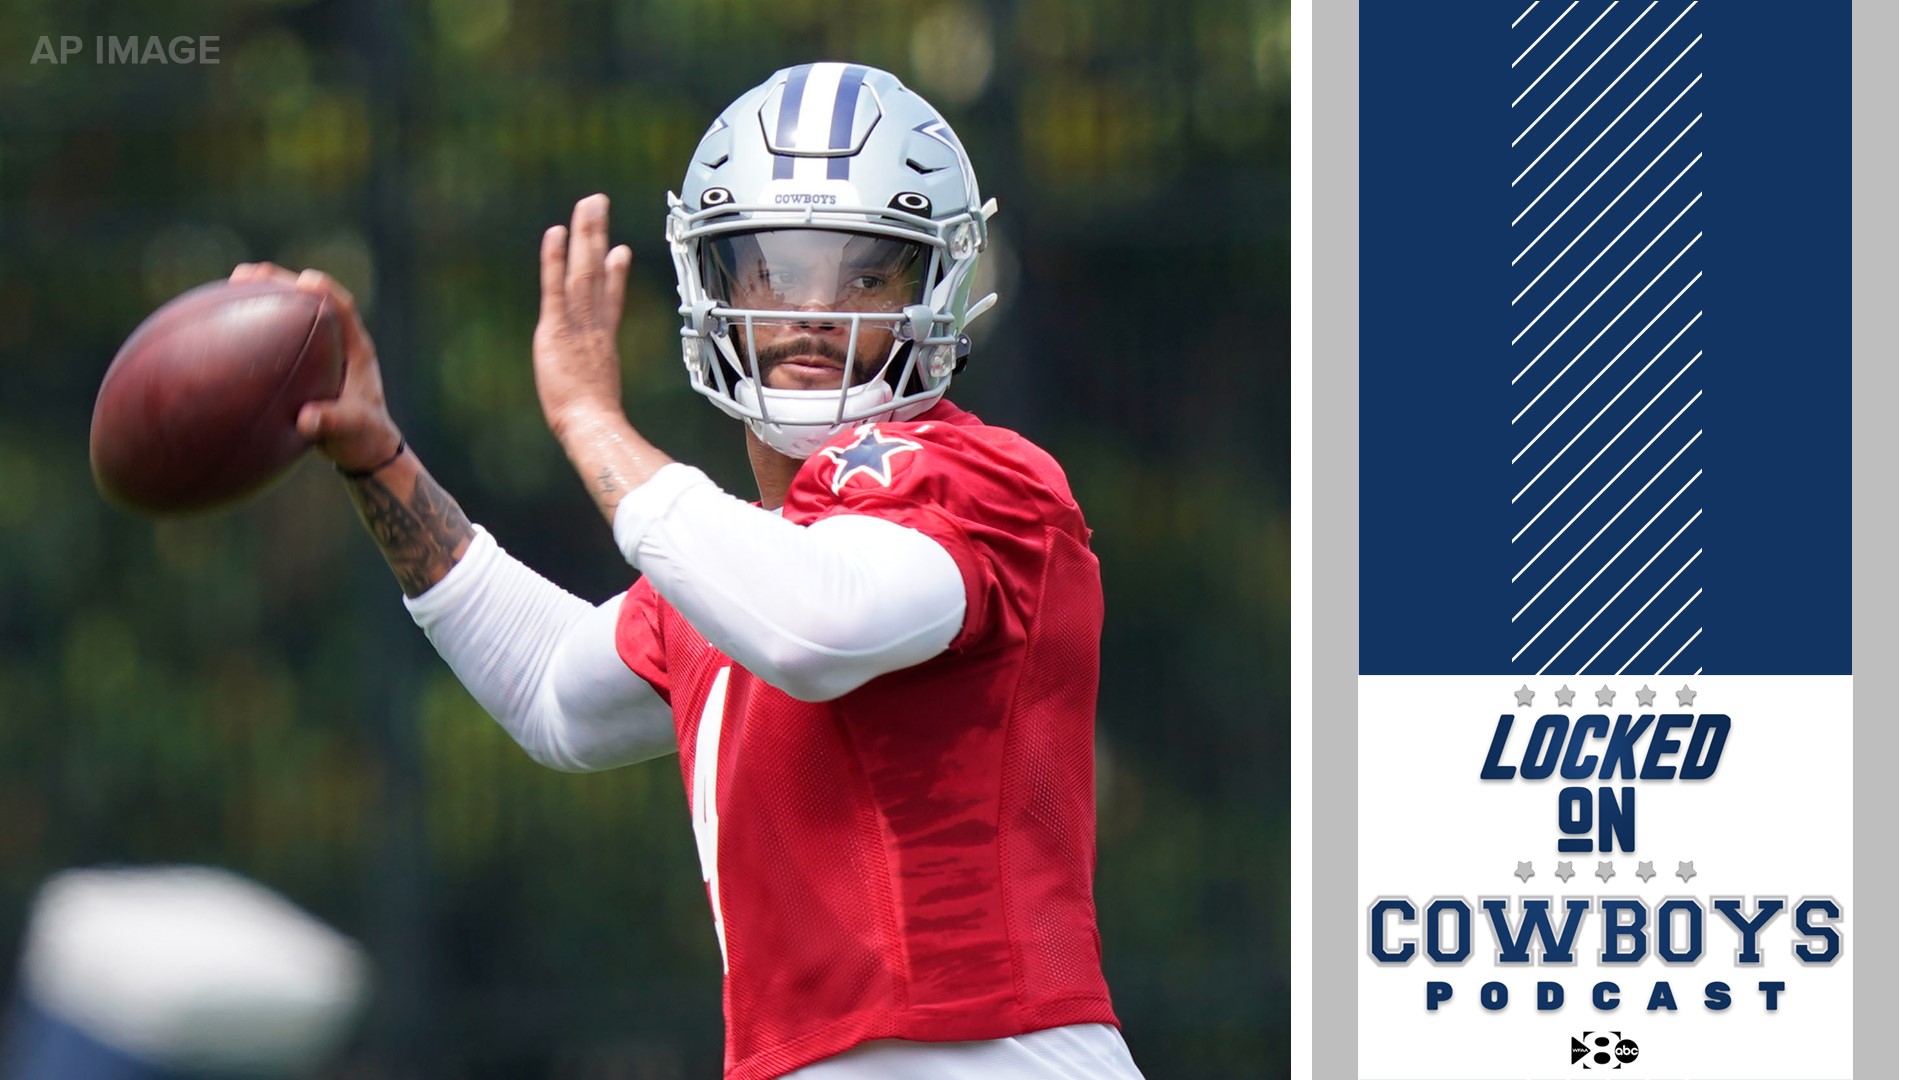 In this episode of the Locked On Cowboys Podcast, Marcus Mosher and Landon McCool preview all of the quarterbacks on the roster heading into training camp.